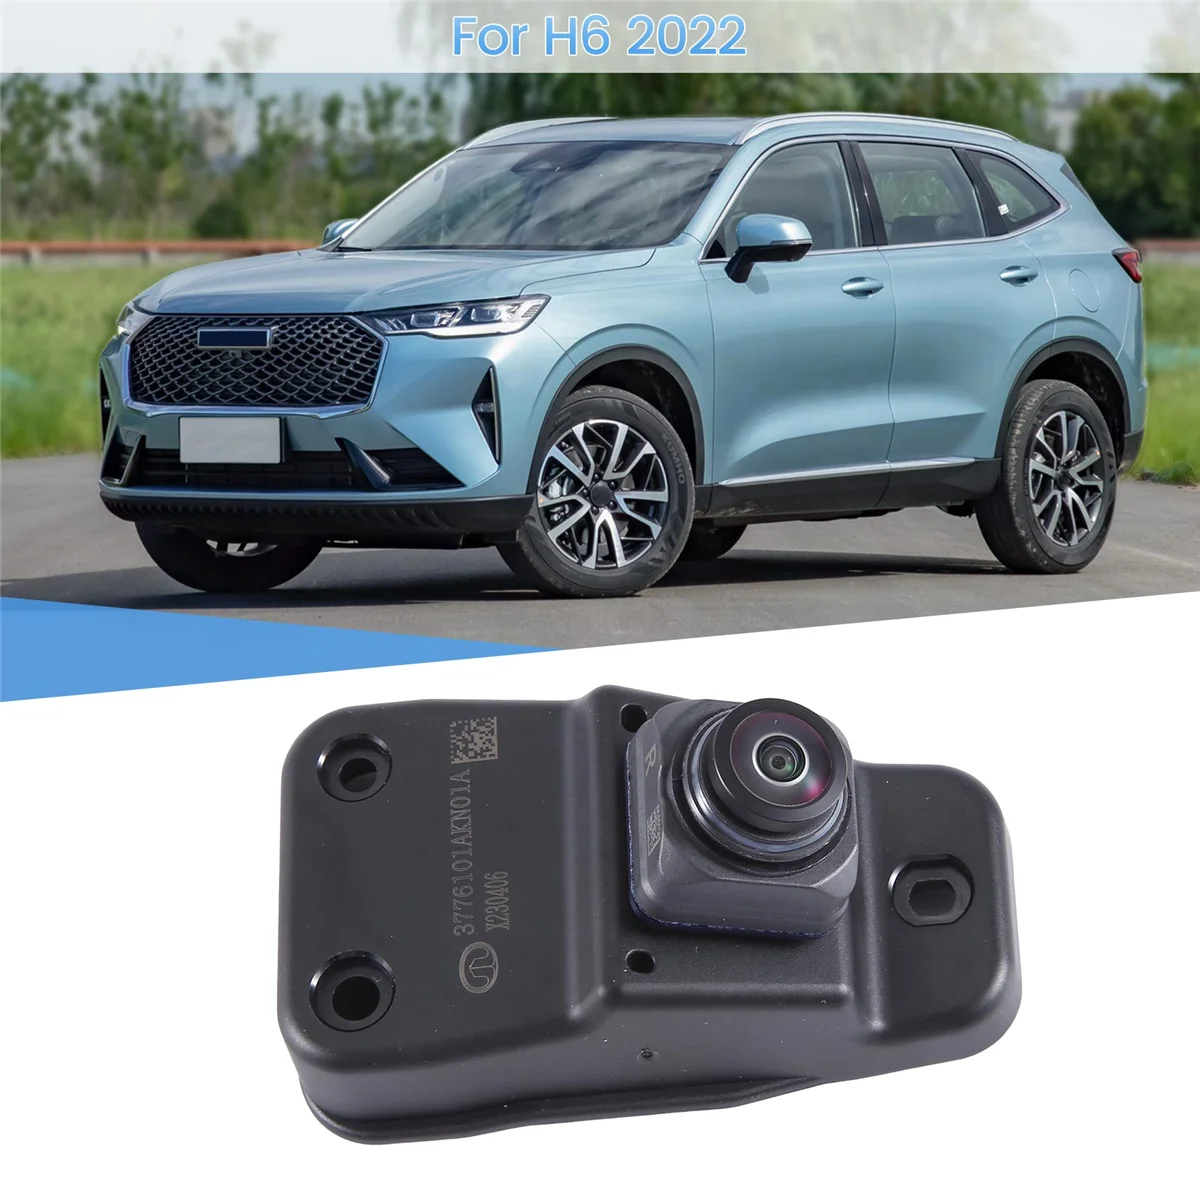 

3776101AKN01A Car Front Center Grid Camera Front Surround View Camera for Great Wall Haval H6 2022 Third Generation H6